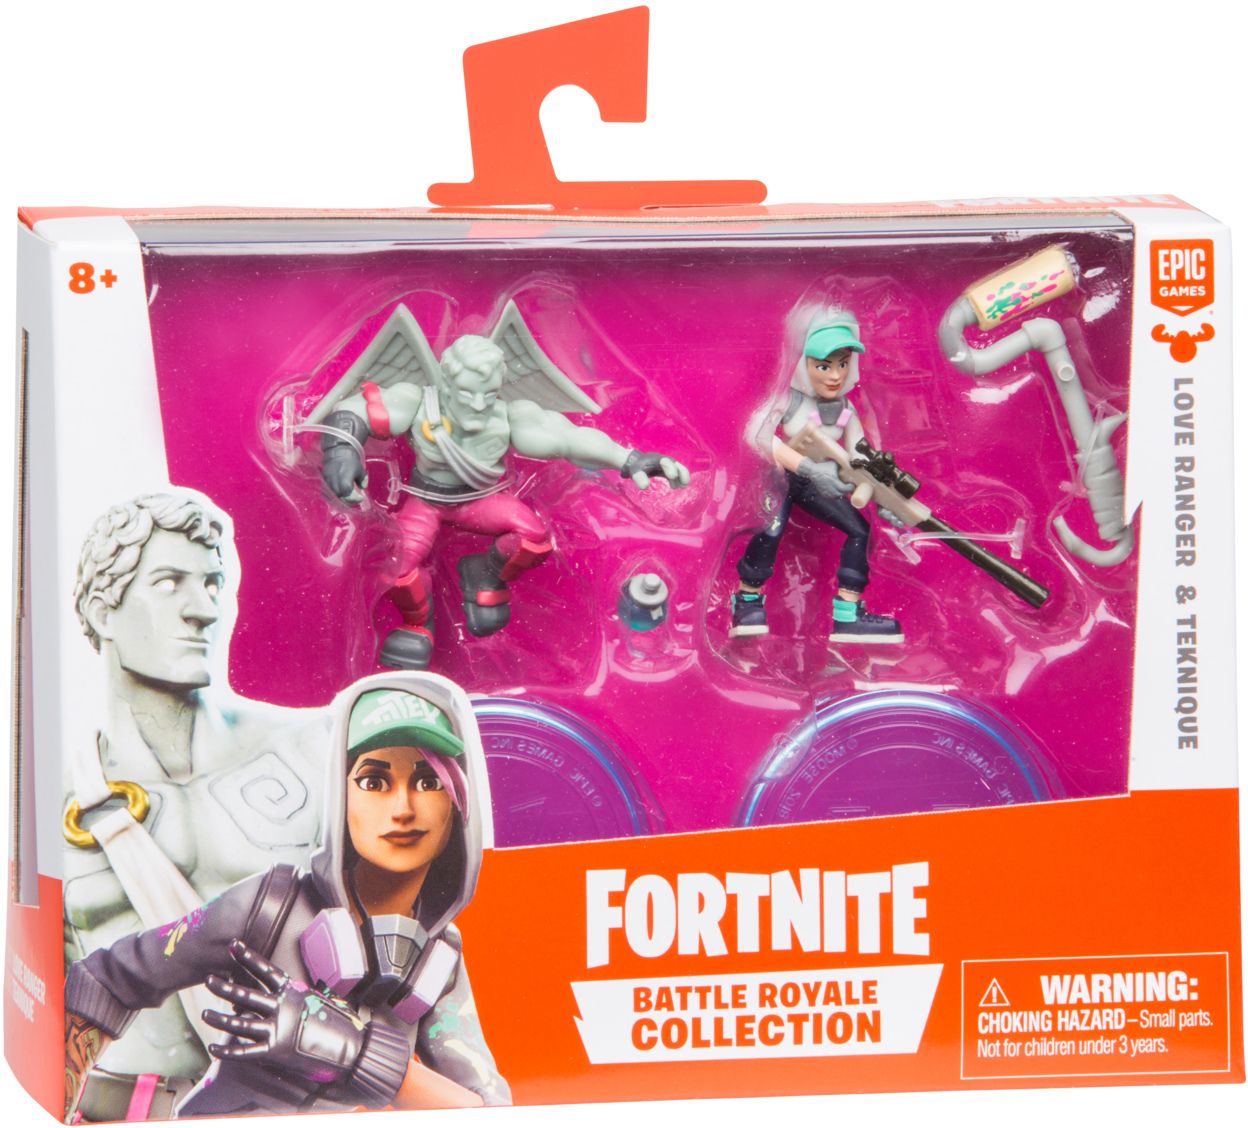 Fortnite Battle Royale Collection Duo Pack Styles May Vary Best Buy